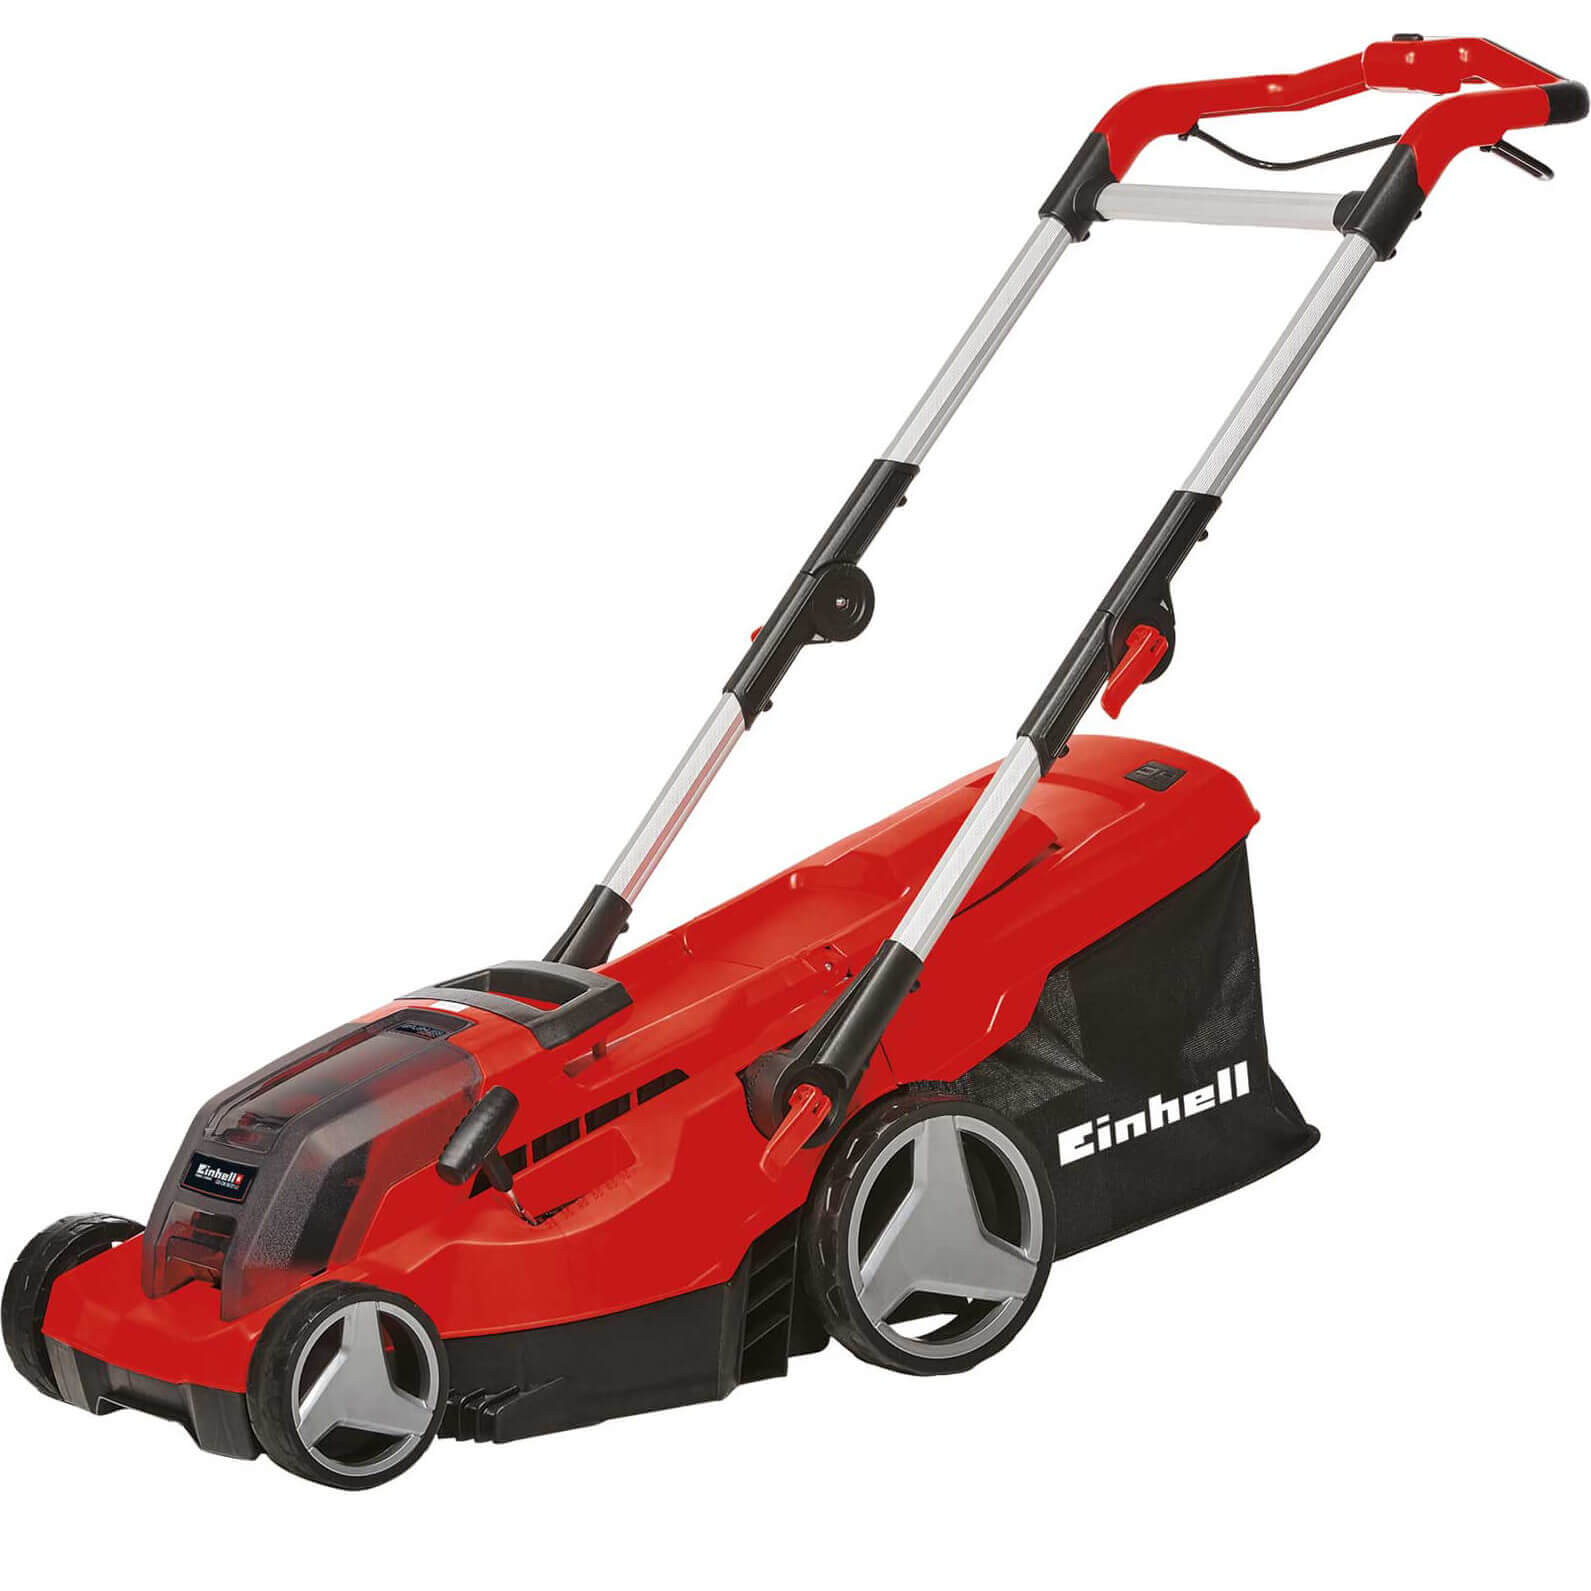 Image of Einhell GE-CM 36/37 Li 36v Cordless Lawnmower 370mm No Batteries No Charger